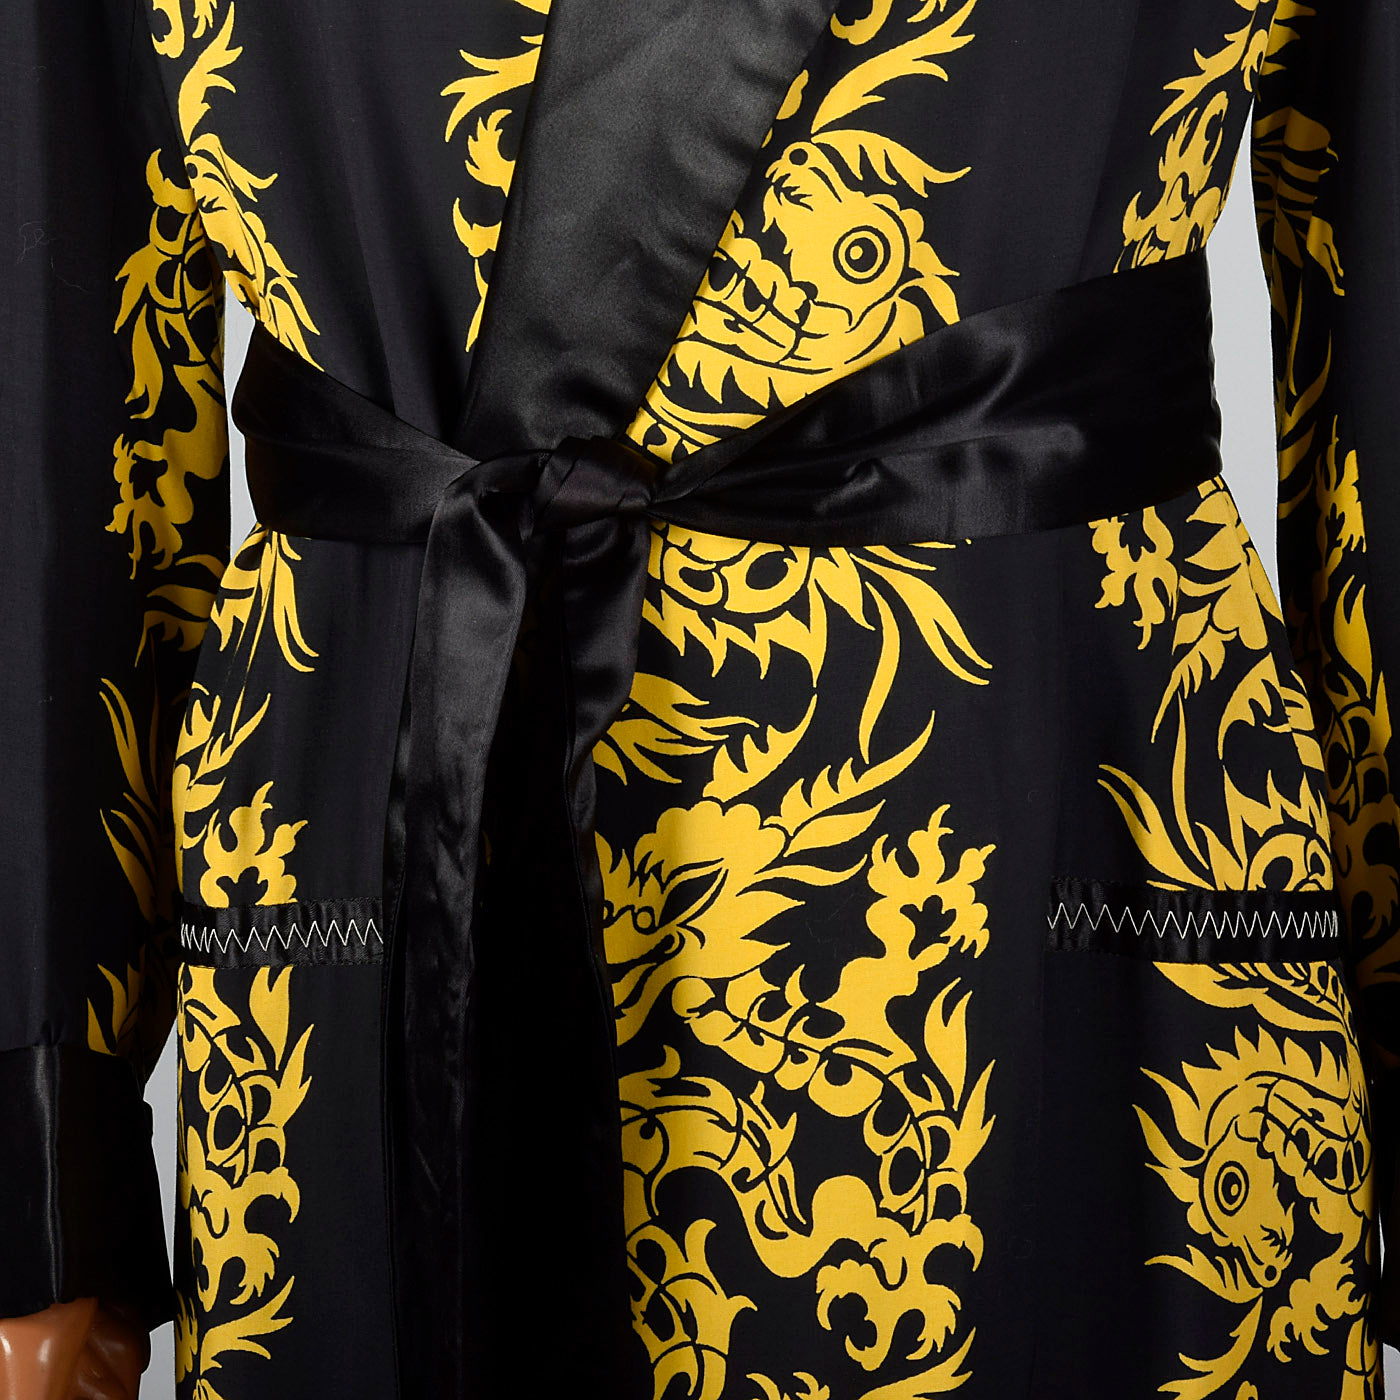 1950s Mens Deadstock Robe with Gold Dragons